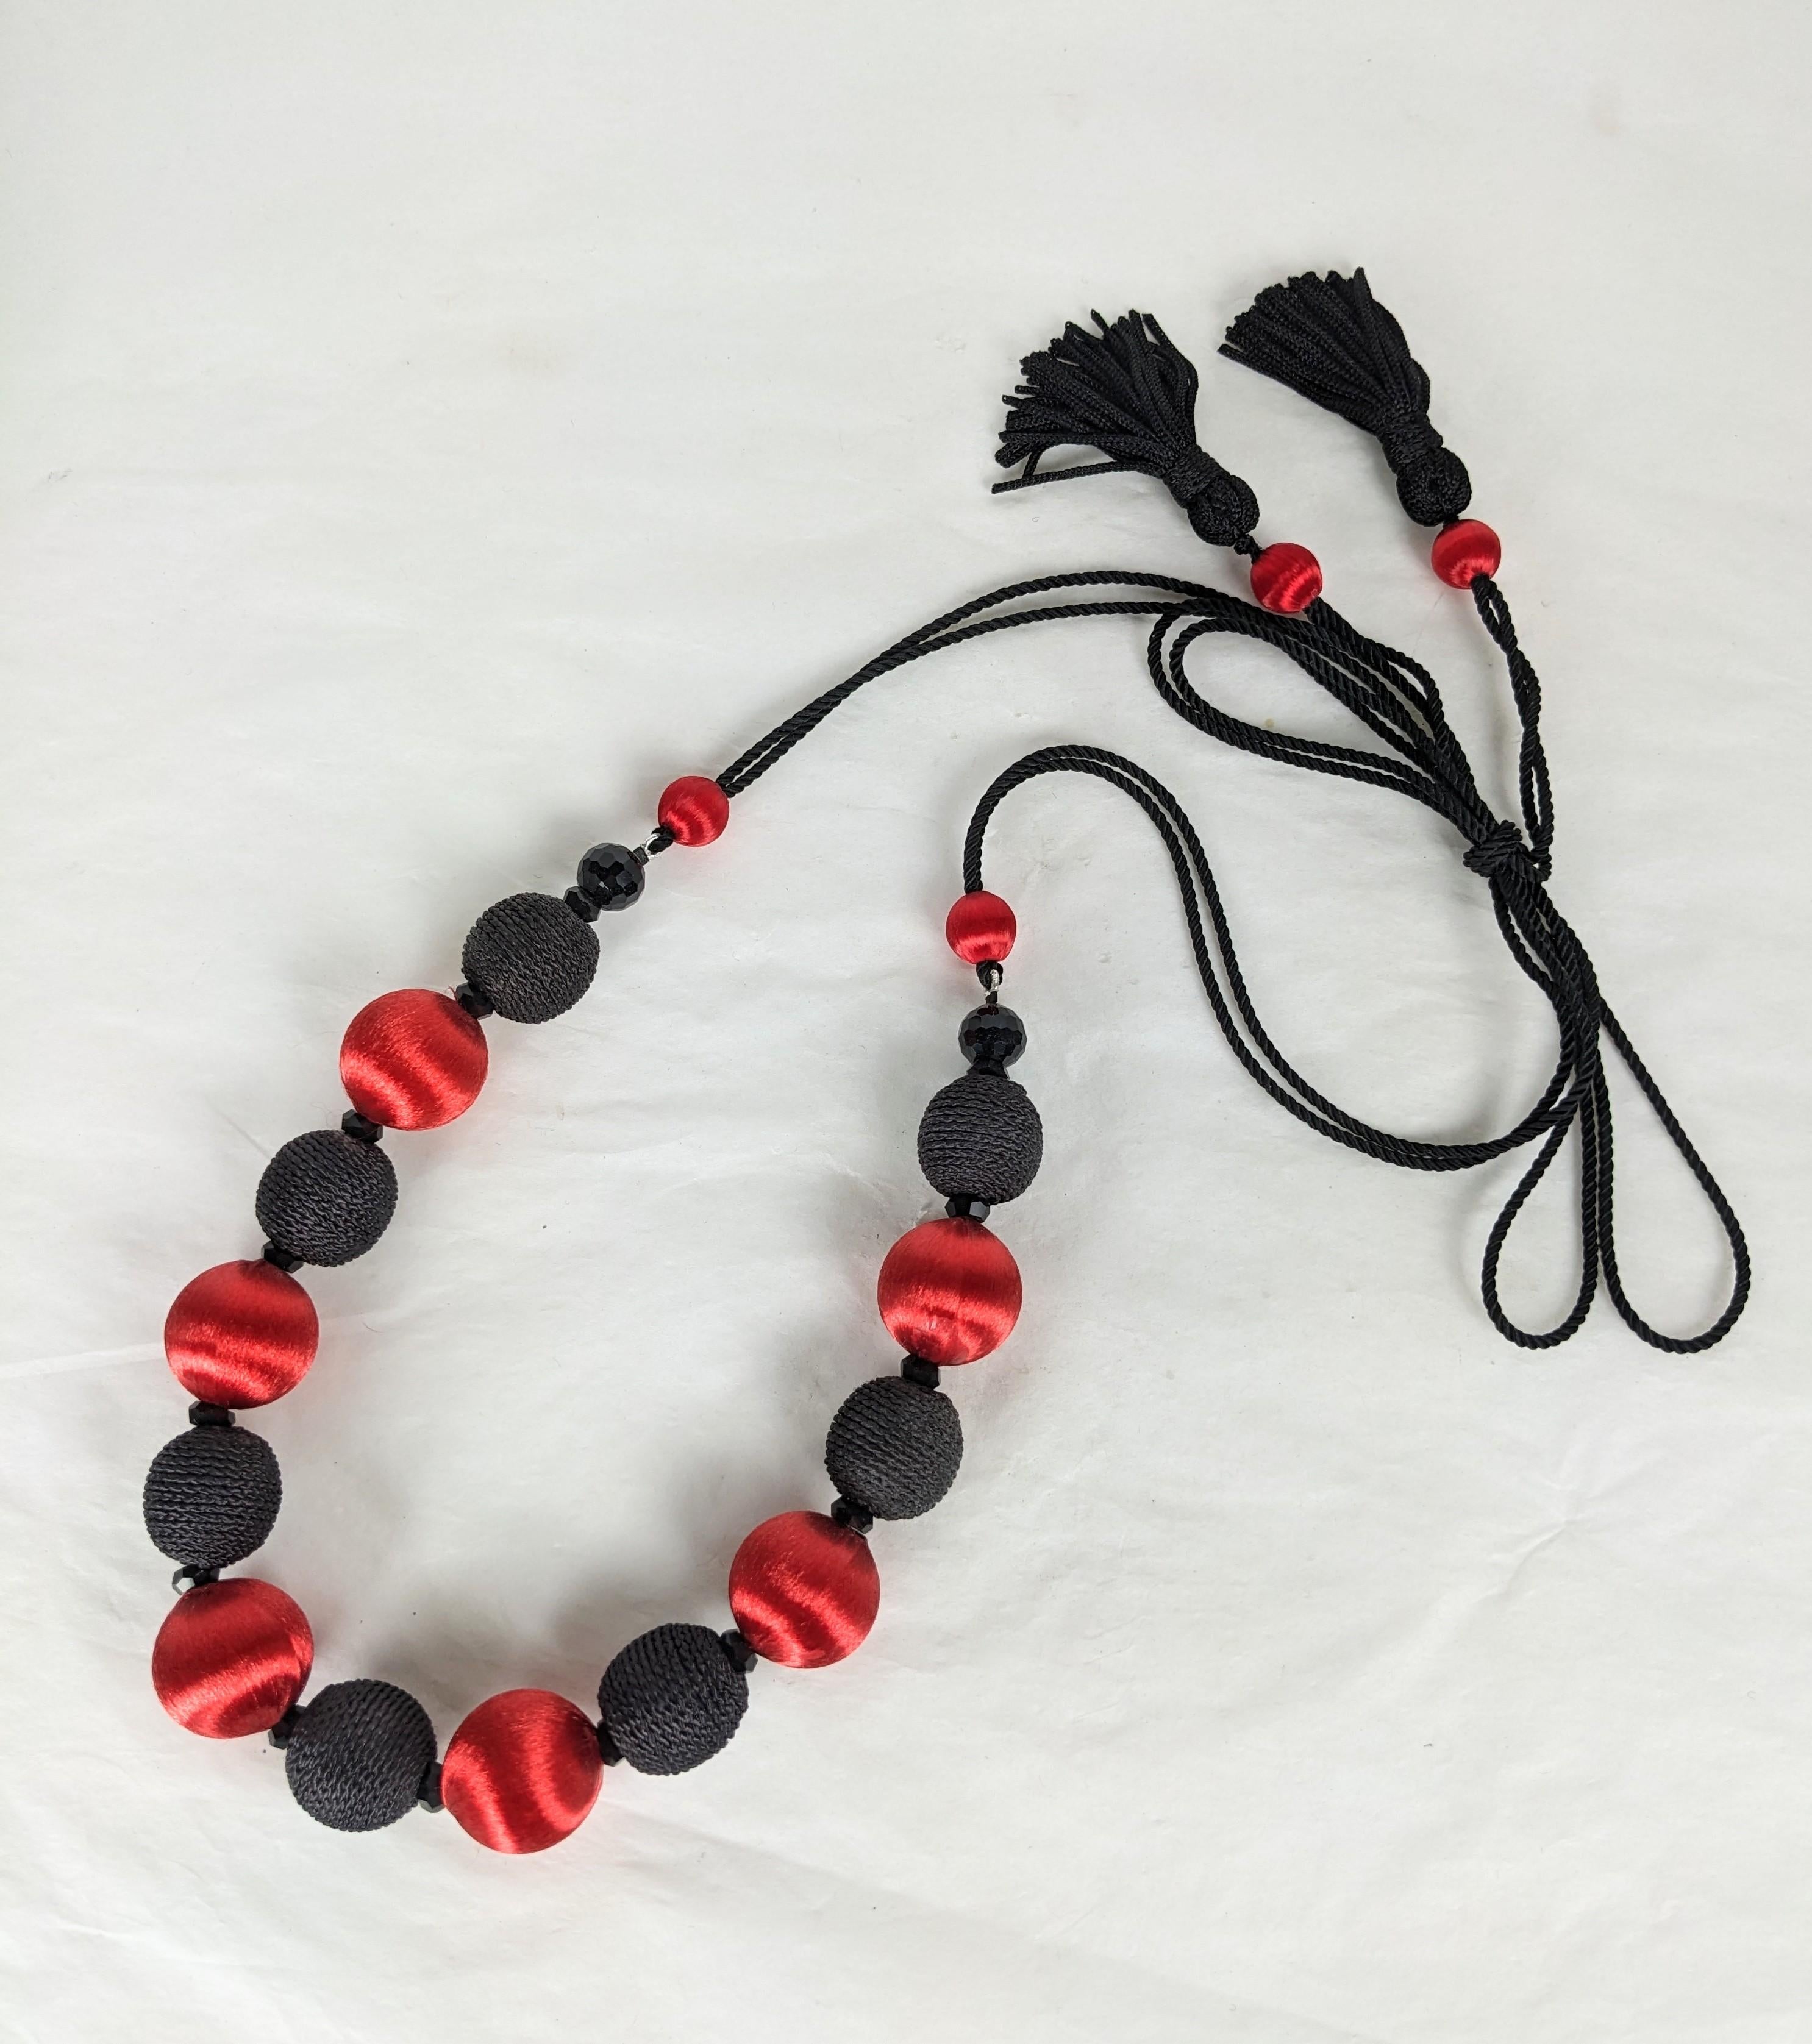 Yves Saint Laurent  Passementerie Necklace, Haute Couture Spring Summer 1977 Spanish Collection. Composed of silk cord with tassel ends. Black faceted jet crystal beads and black corded soutache with red silk sateen large and small beads. Excellent